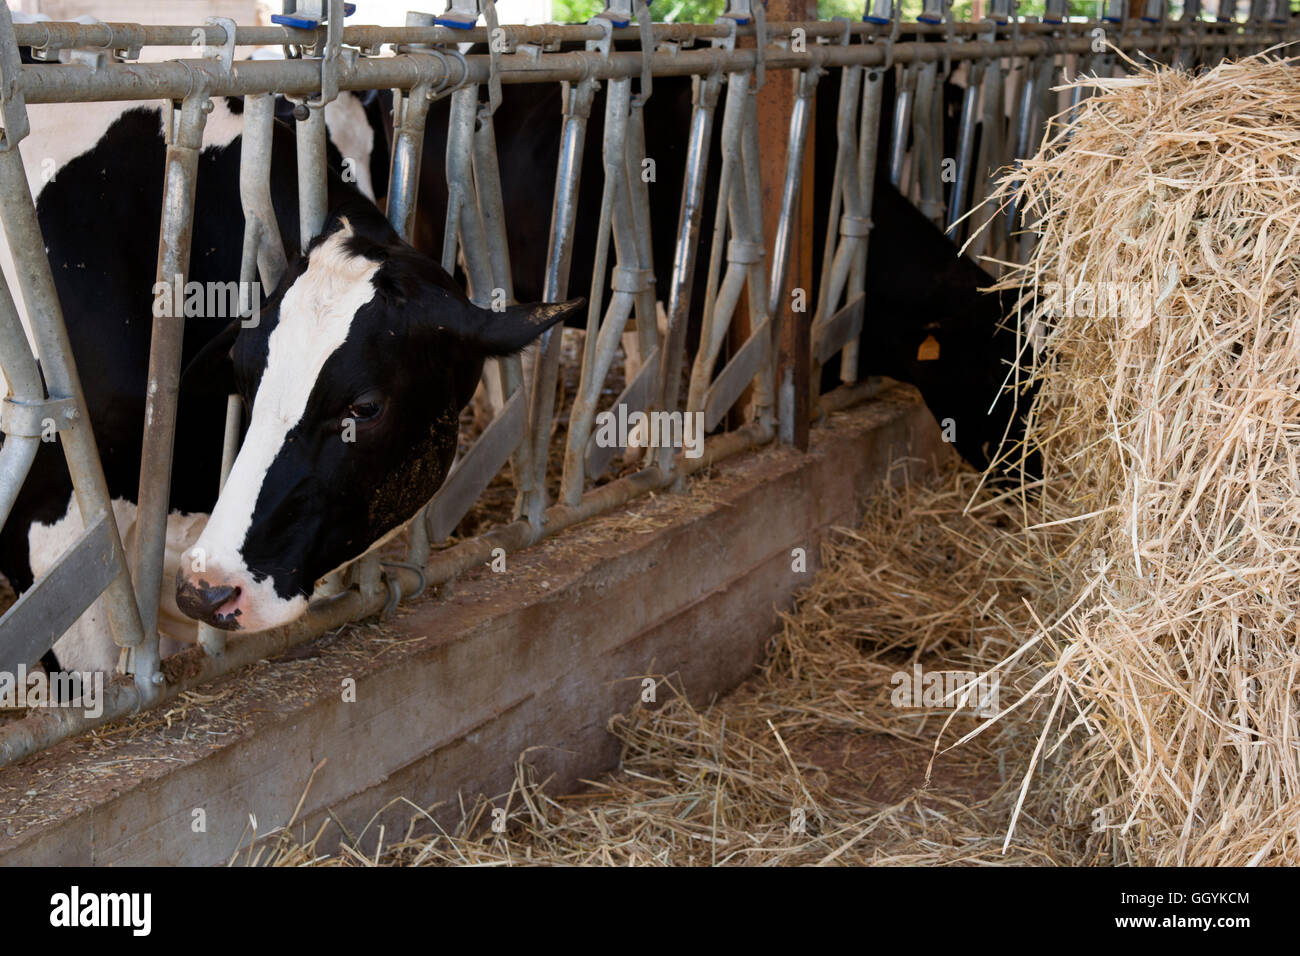 cows eating grass in a cattle shed Stock Photo